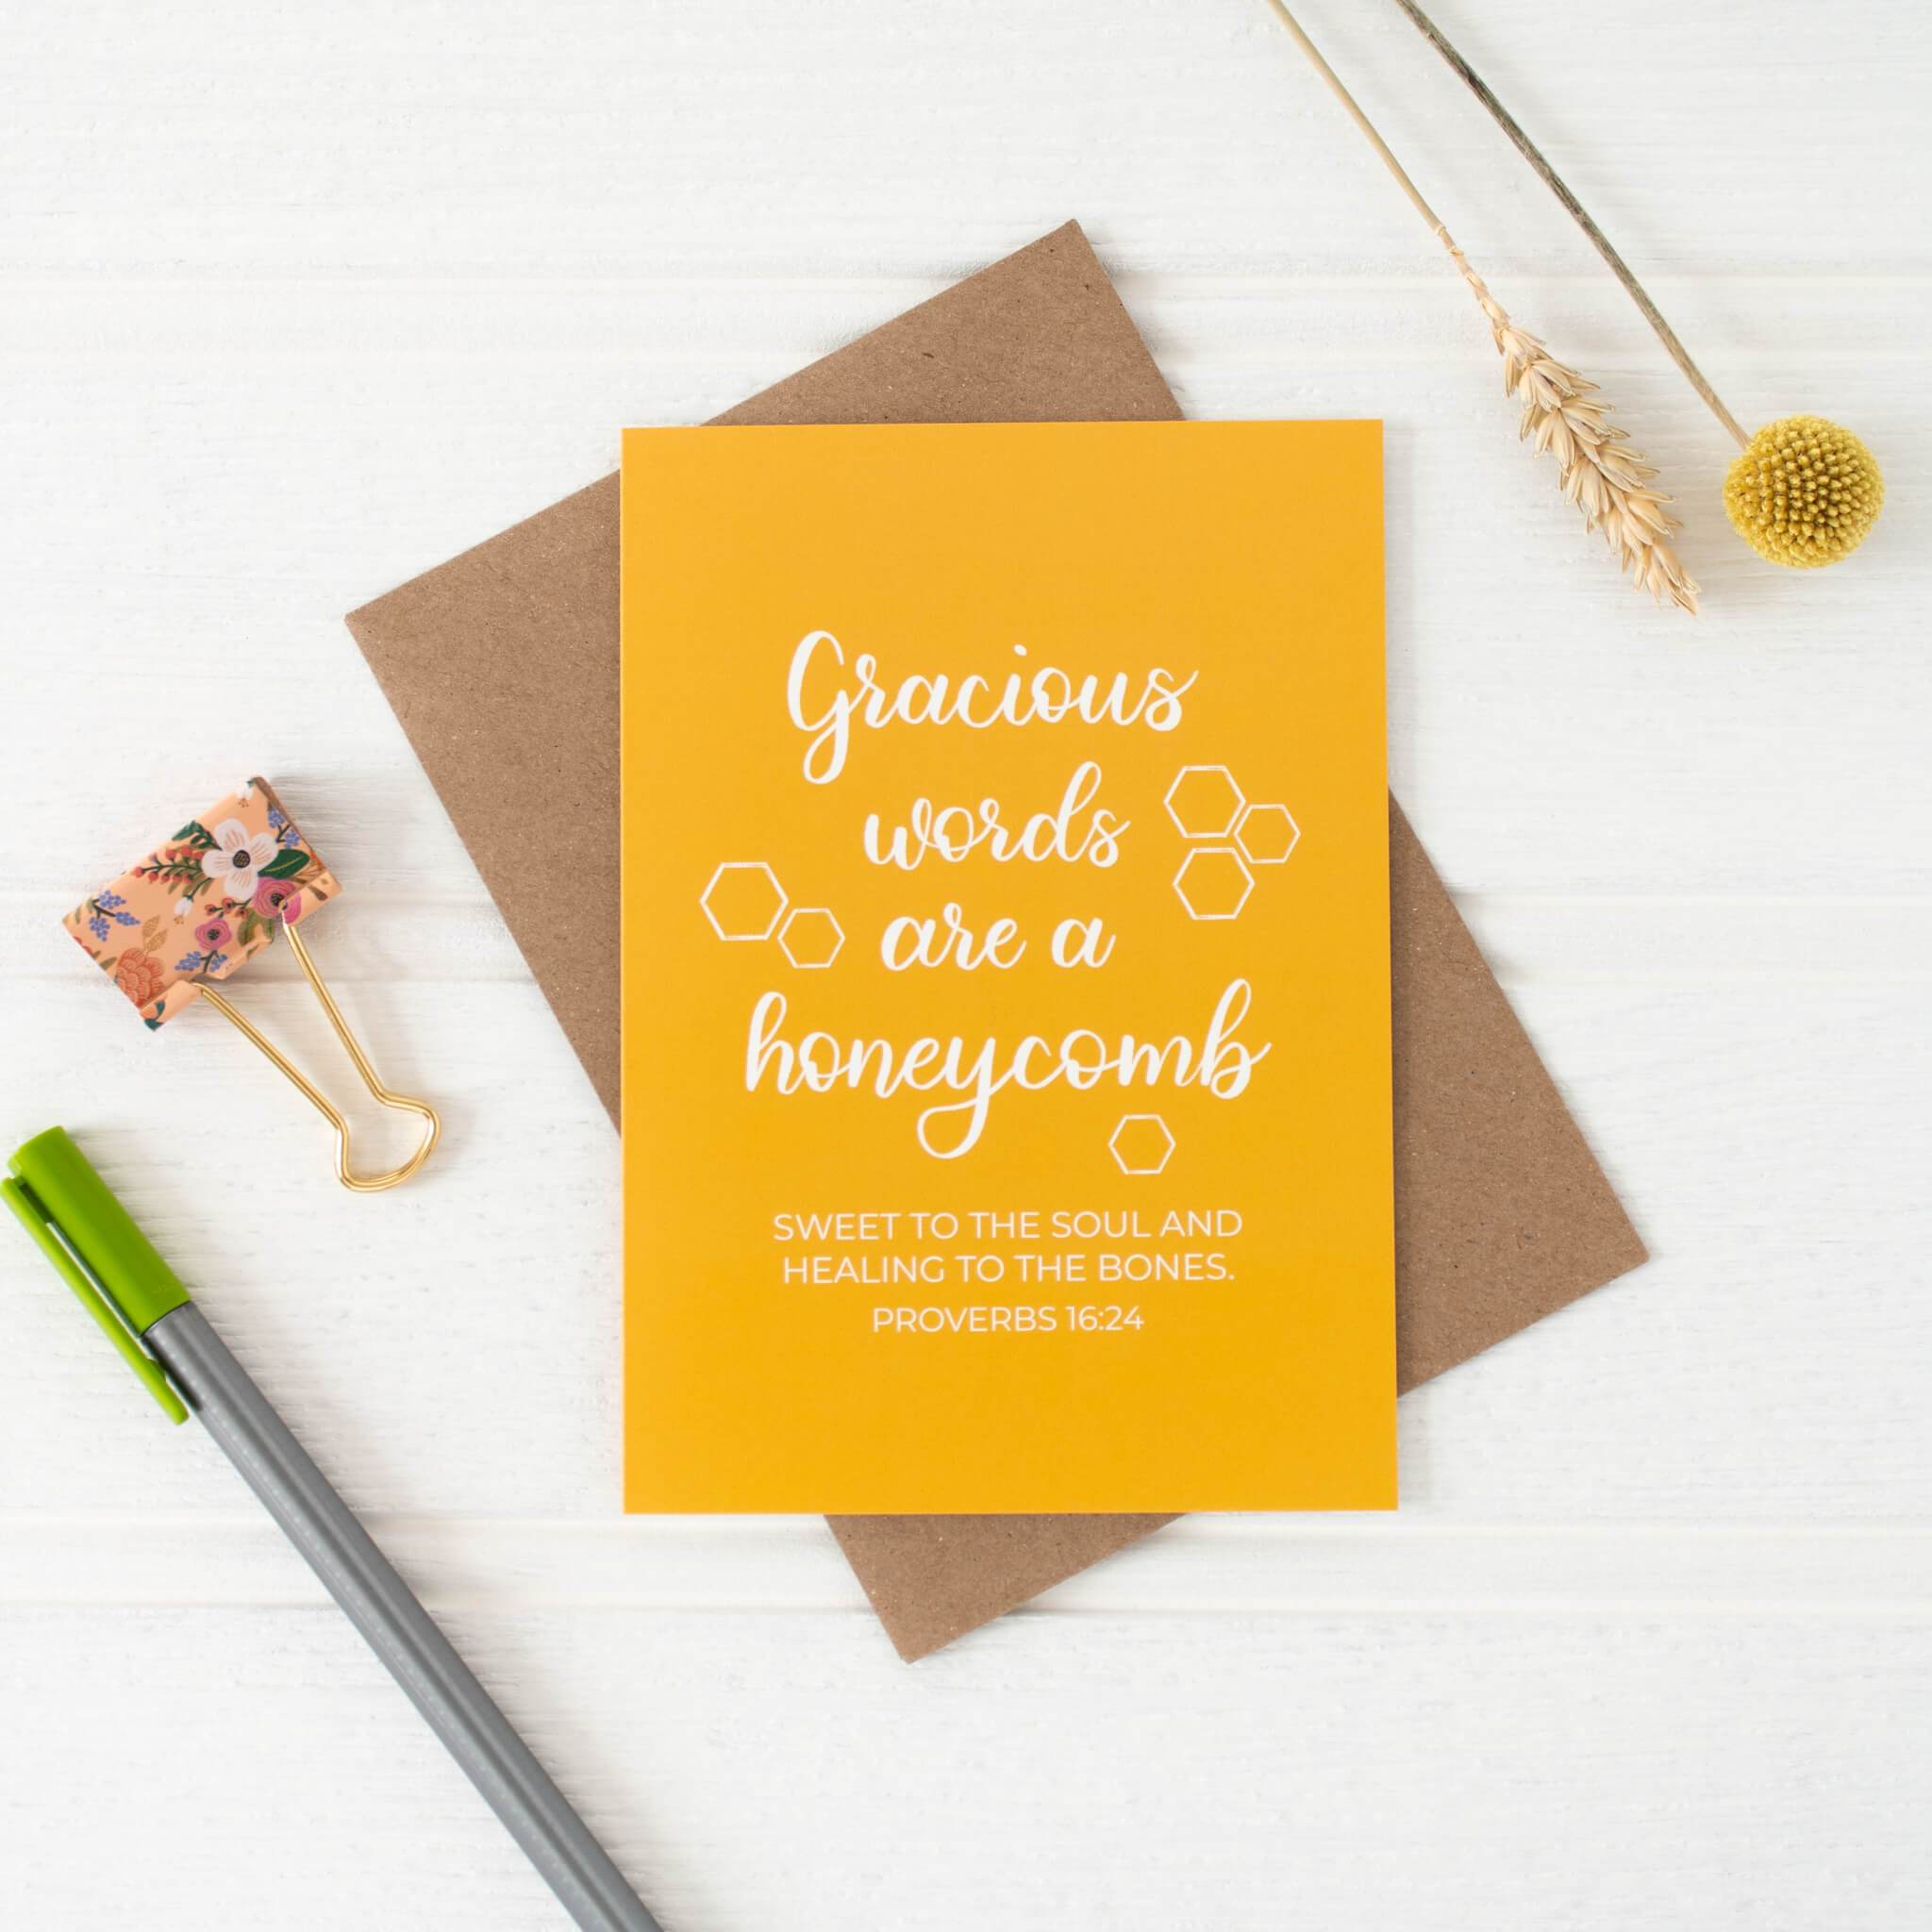 Gracious Words are a Honeycomb Card - Proverbs 16:24 - By the Brook Creations